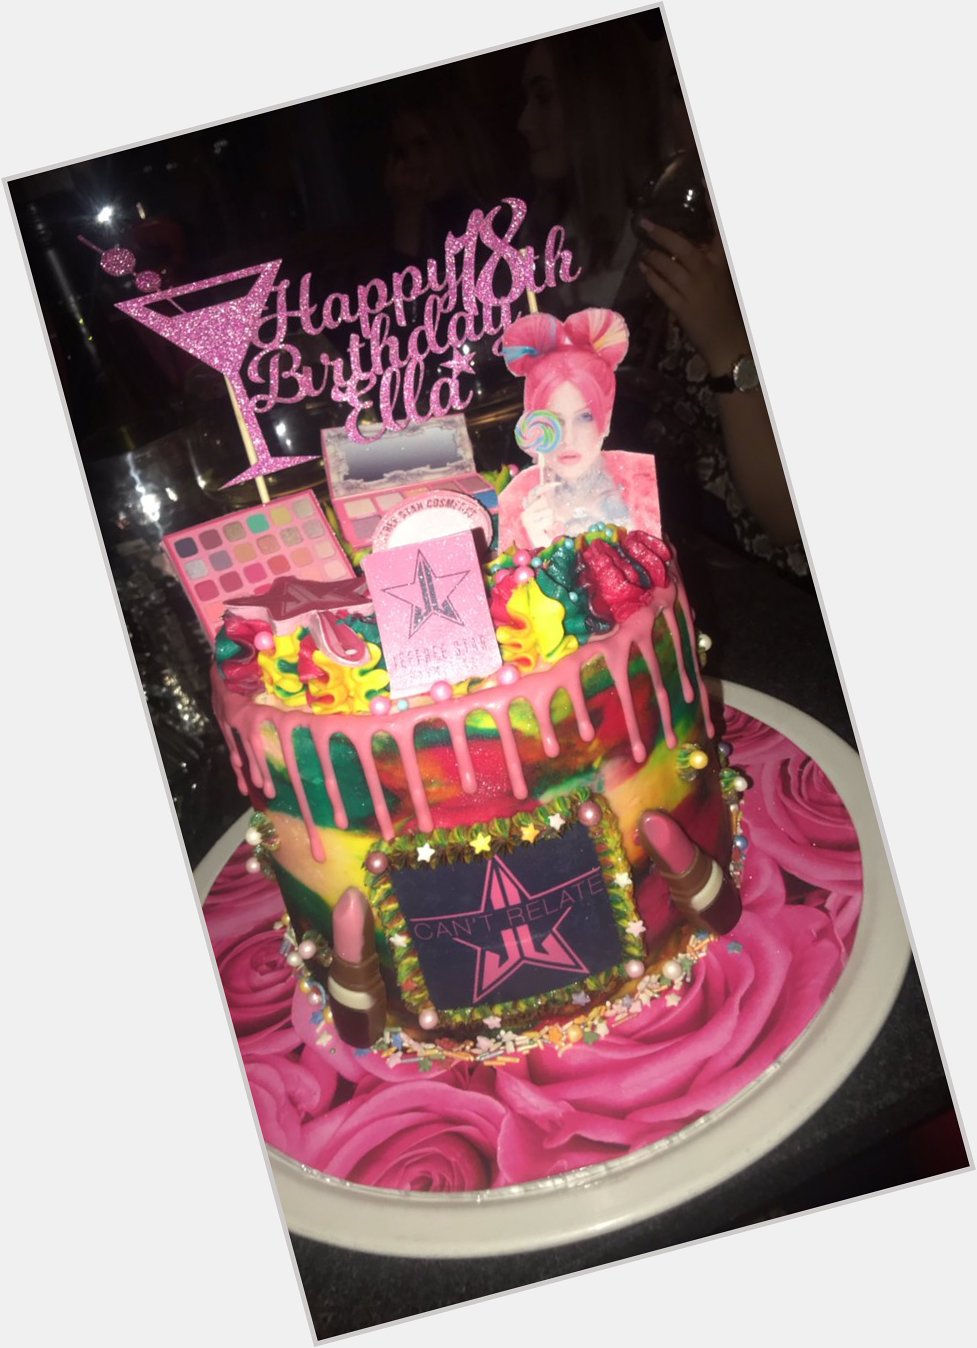  Happy birthday to me with my Jeffree Star inspired cake  